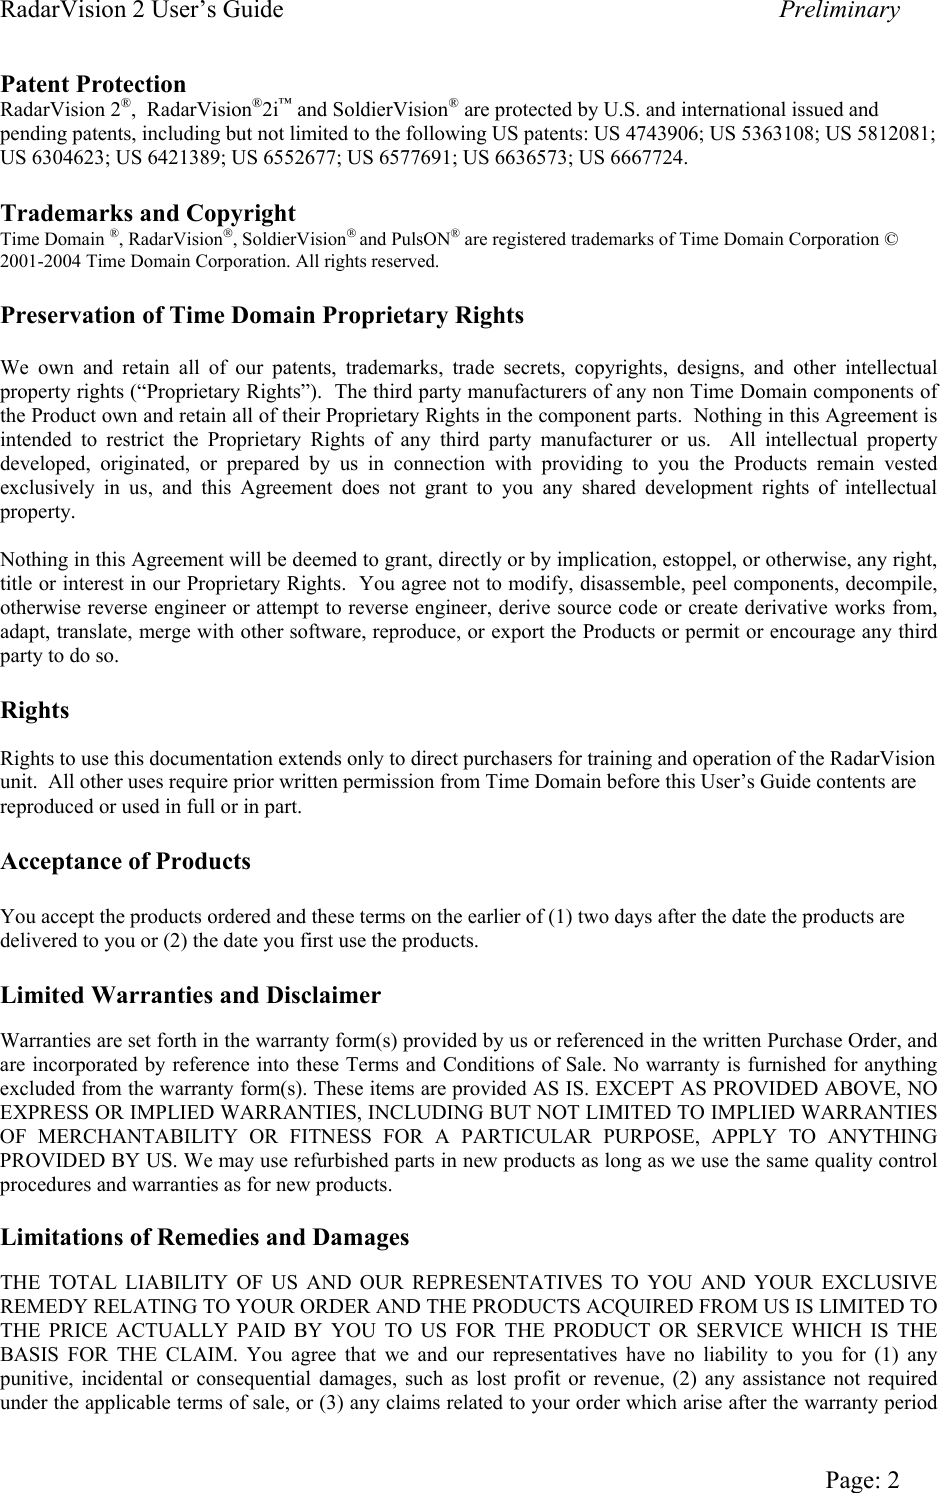 RadarVision 2 User’s Guide    Preliminary Patent Protection RadarVision 2®,  RadarVision®2i™ and SoldierVision® are protected by U.S. and international issued and pending patents, including but not limited to the following US patents: US 4743906; US 5363108; US 5812081; US 6304623; US 6421389; US 6552677; US 6577691; US 6636573; US 6667724.  Trademarks and Copyright Time Domain ®, RadarVision, SoldierVision and PulsON® are registered trademarks of Time Domain Corporation © 2001-2004 Time Domain Corporation. All rights reserved.   Preservation of Time Domain Proprietary Rights  We own and retain all of our patents, trademarks, trade secrets, copyrights, designs, and other intellectual property rights (“Proprietary Rights”).  The third party manufacturers of any non Time Domain components of the Product own and retain all of their Proprietary Rights in the component parts.  Nothing in this Agreement is intended to restrict the Proprietary Rights of any third party manufacturer or us.  All intellectual property developed, originated, or prepared by us in connection with providing to you the Products remain vested exclusively in us, and this Agreement does not grant to you any shared development rights of intellectual property.  Nothing in this Agreement will be deemed to grant, directly or by implication, estoppel, or otherwise, any right, title or interest in our Proprietary Rights.  You agree not to modify, disassemble, peel components, decompile, otherwise reverse engineer or attempt to reverse engineer, derive source code or create derivative works from, adapt, translate, merge with other software, reproduce, or export the Products or permit or encourage any third party to do so.    Rights  Rights to use this documentation extends only to direct purchasers for training and operation of the RadarVision unit.  All other uses require prior written permission from Time Domain before this User’s Guide contents are reproduced or used in full or in part.  Acceptance of Products  You accept the products ordered and these terms on the earlier of (1) two days after the date the products are delivered to you or (2) the date you first use the products.  Limited Warranties and Disclaimer  Warranties are set forth in the warranty form(s) provided by us or referenced in the written Purchase Order, and are incorporated by reference into these Terms and Conditions of Sale. No warranty is furnished for anything excluded from the warranty form(s). These items are provided AS IS. EXCEPT AS PROVIDED ABOVE, NO EXPRESS OR IMPLIED WARRANTIES, INCLUDING BUT NOT LIMITED TO IMPLIED WARRANTIES OF MERCHANTABILITY OR FITNESS FOR A PARTICULAR PURPOSE, APPLY TO ANYTHING PROVIDED BY US. We may use refurbished parts in new products as long as we use the same quality control procedures and warranties as for new products.  Limitations of Remedies and Damages  THE TOTAL LIABILITY OF US AND OUR REPRESENTATIVES TO YOU AND YOUR EXCLUSIVE REMEDY RELATING TO YOUR ORDER AND THE PRODUCTS ACQUIRED FROM US IS LIMITED TO THE PRICE ACTUALLY PAID BY YOU TO US FOR THE PRODUCT OR SERVICE WHICH IS THE BASIS FOR THE CLAIM. You agree that we and our representatives have no liability to you for (1) any punitive, incidental or consequential damages, such as lost profit or revenue, (2) any assistance not required under the applicable terms of sale, or (3) any claims related to your order which arise after the warranty period   Page: 2 